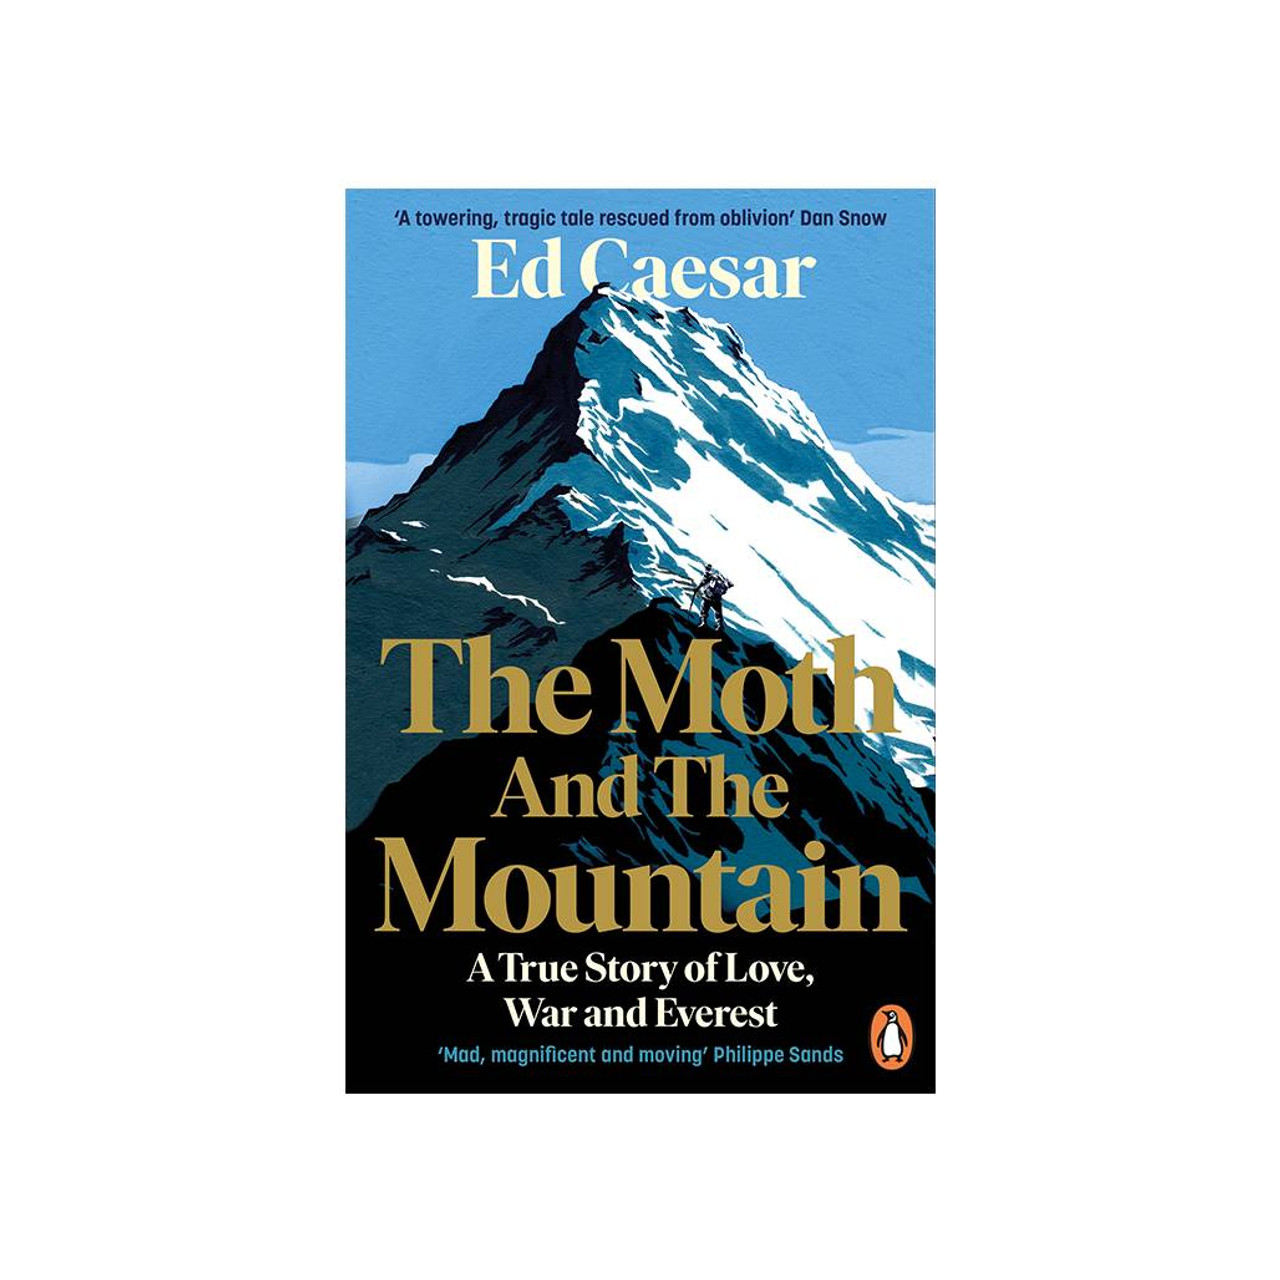 The Moth And The Mountain: A True Story Of Love  War And Everest